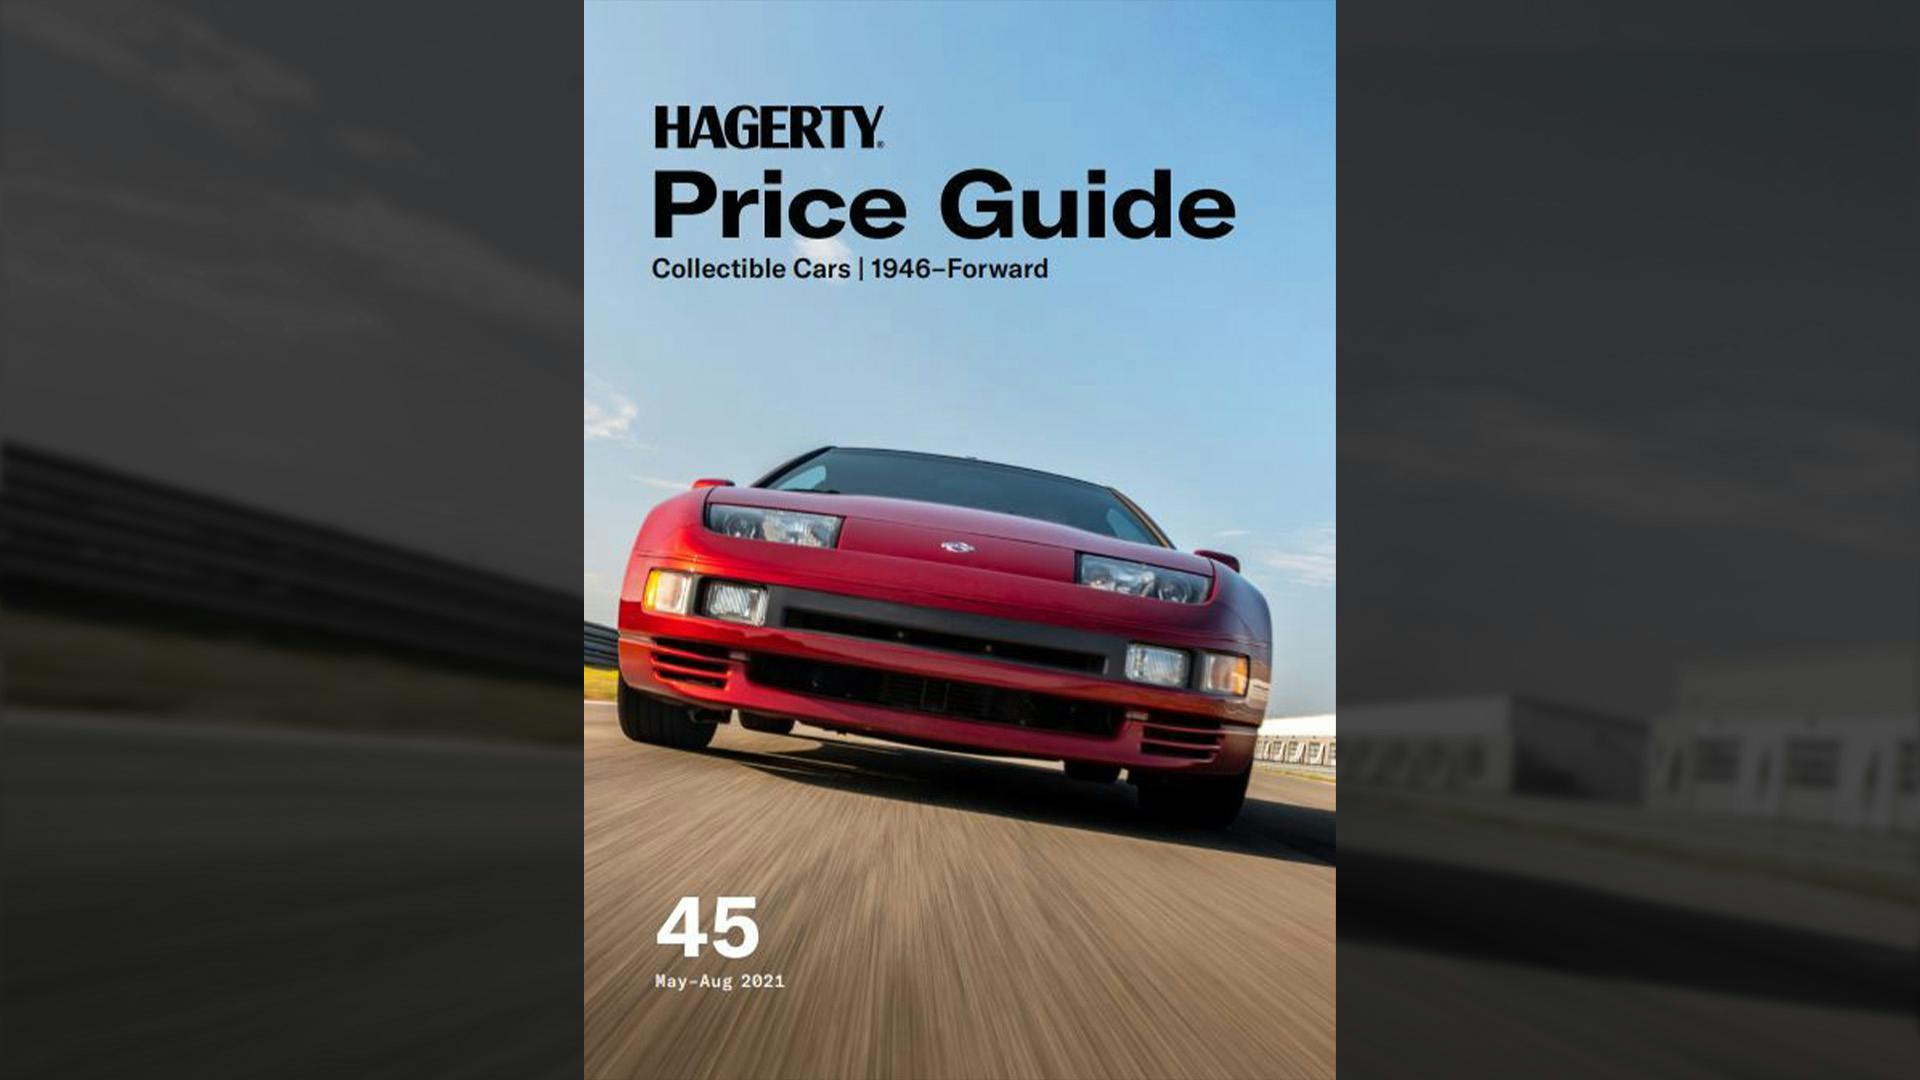 Spring Hagerty Price Guide Update